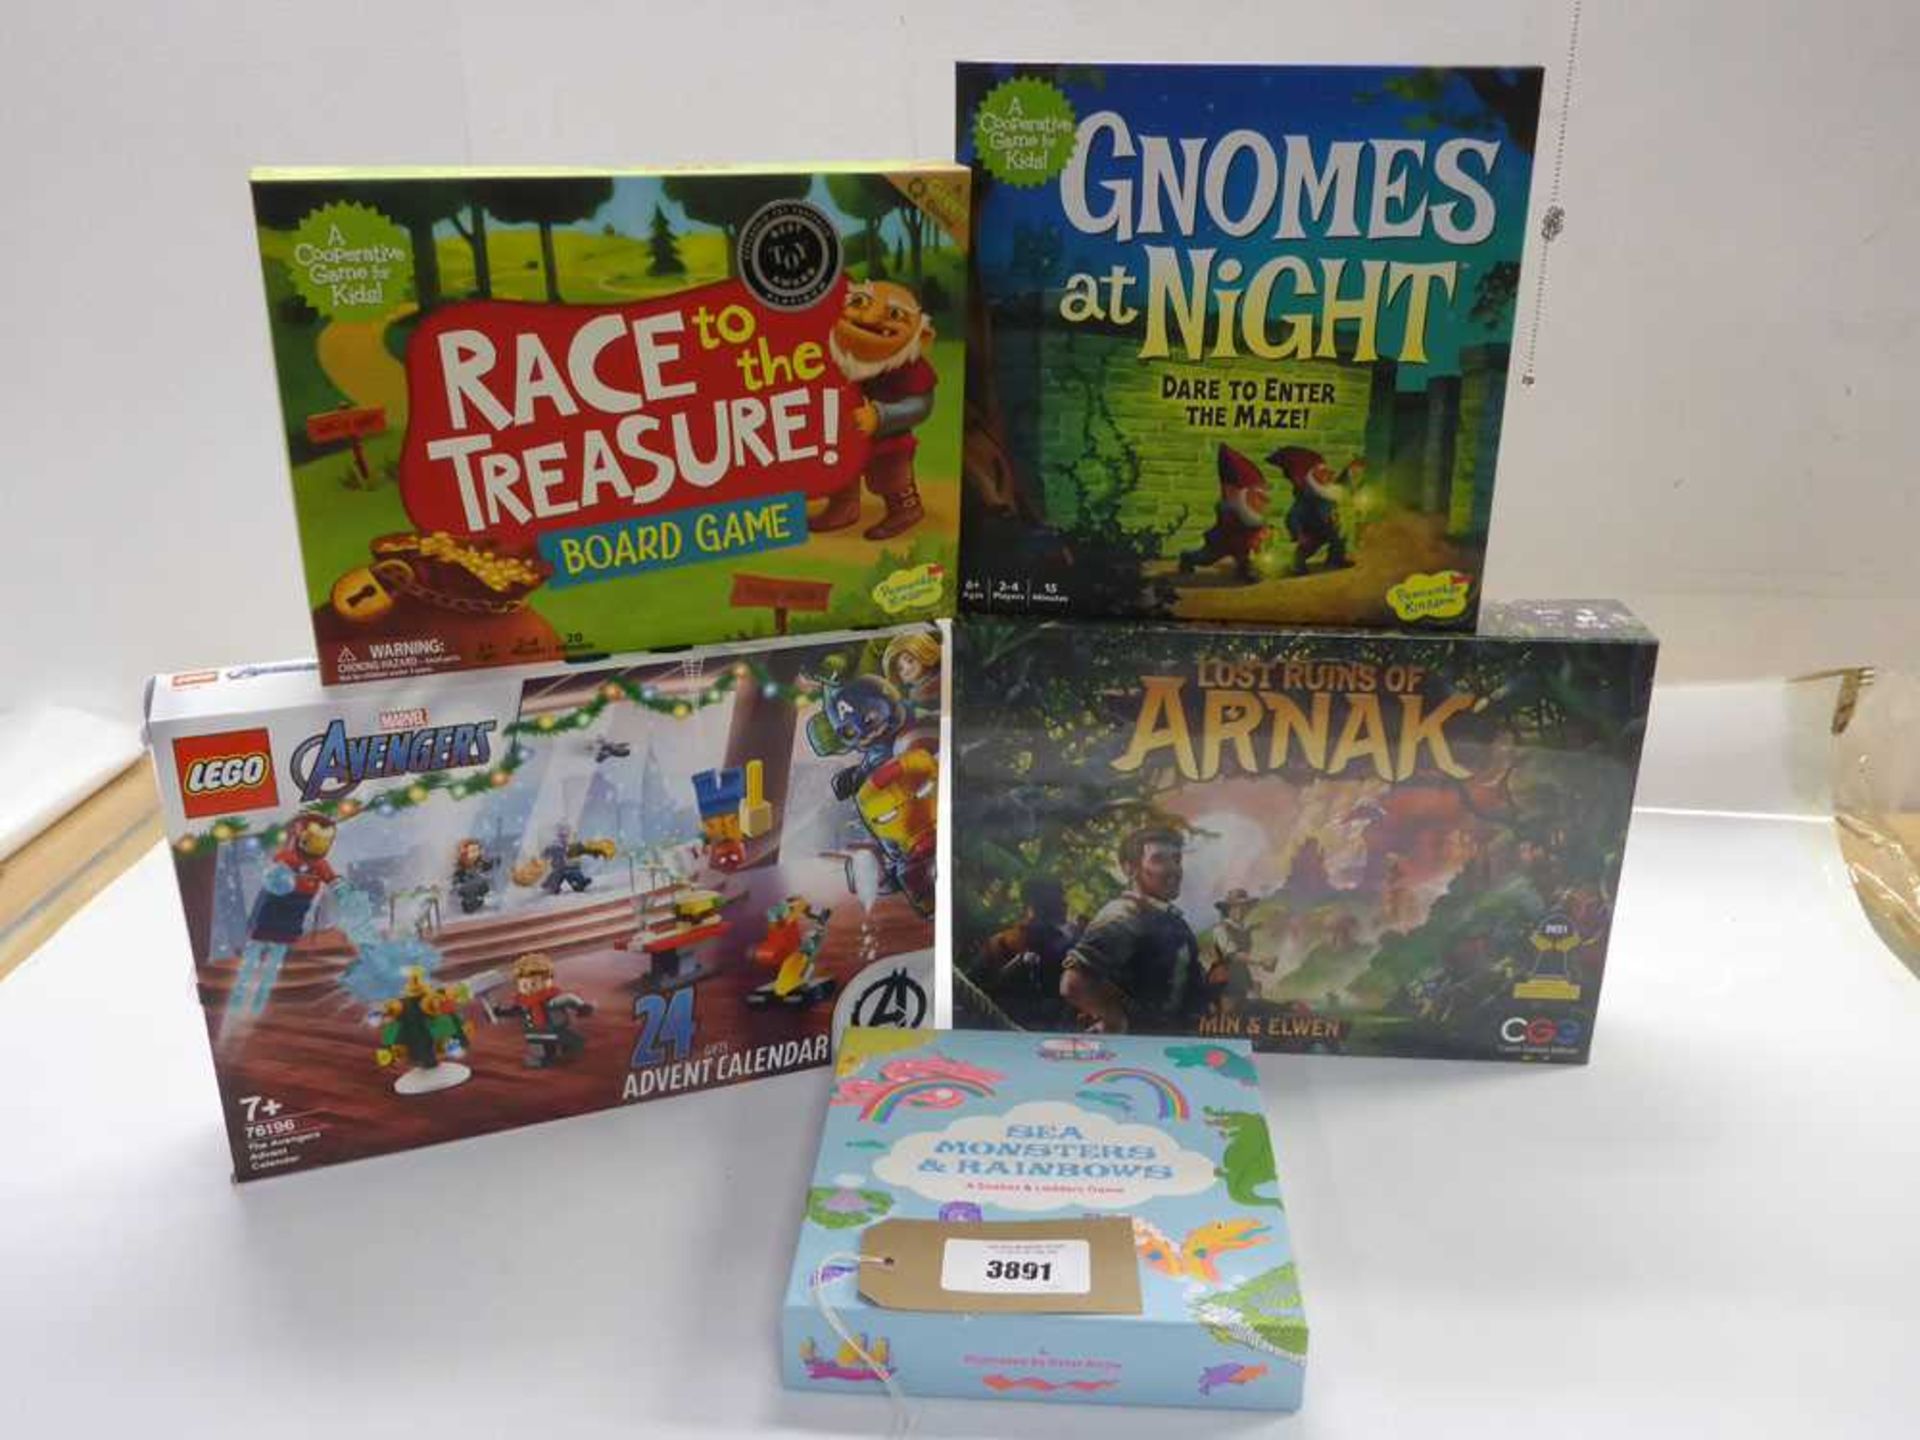 +VAT Lost Ruins of Arnak board game, Gnomes at Night, Race to the Treasure, Snakes & Ladders and